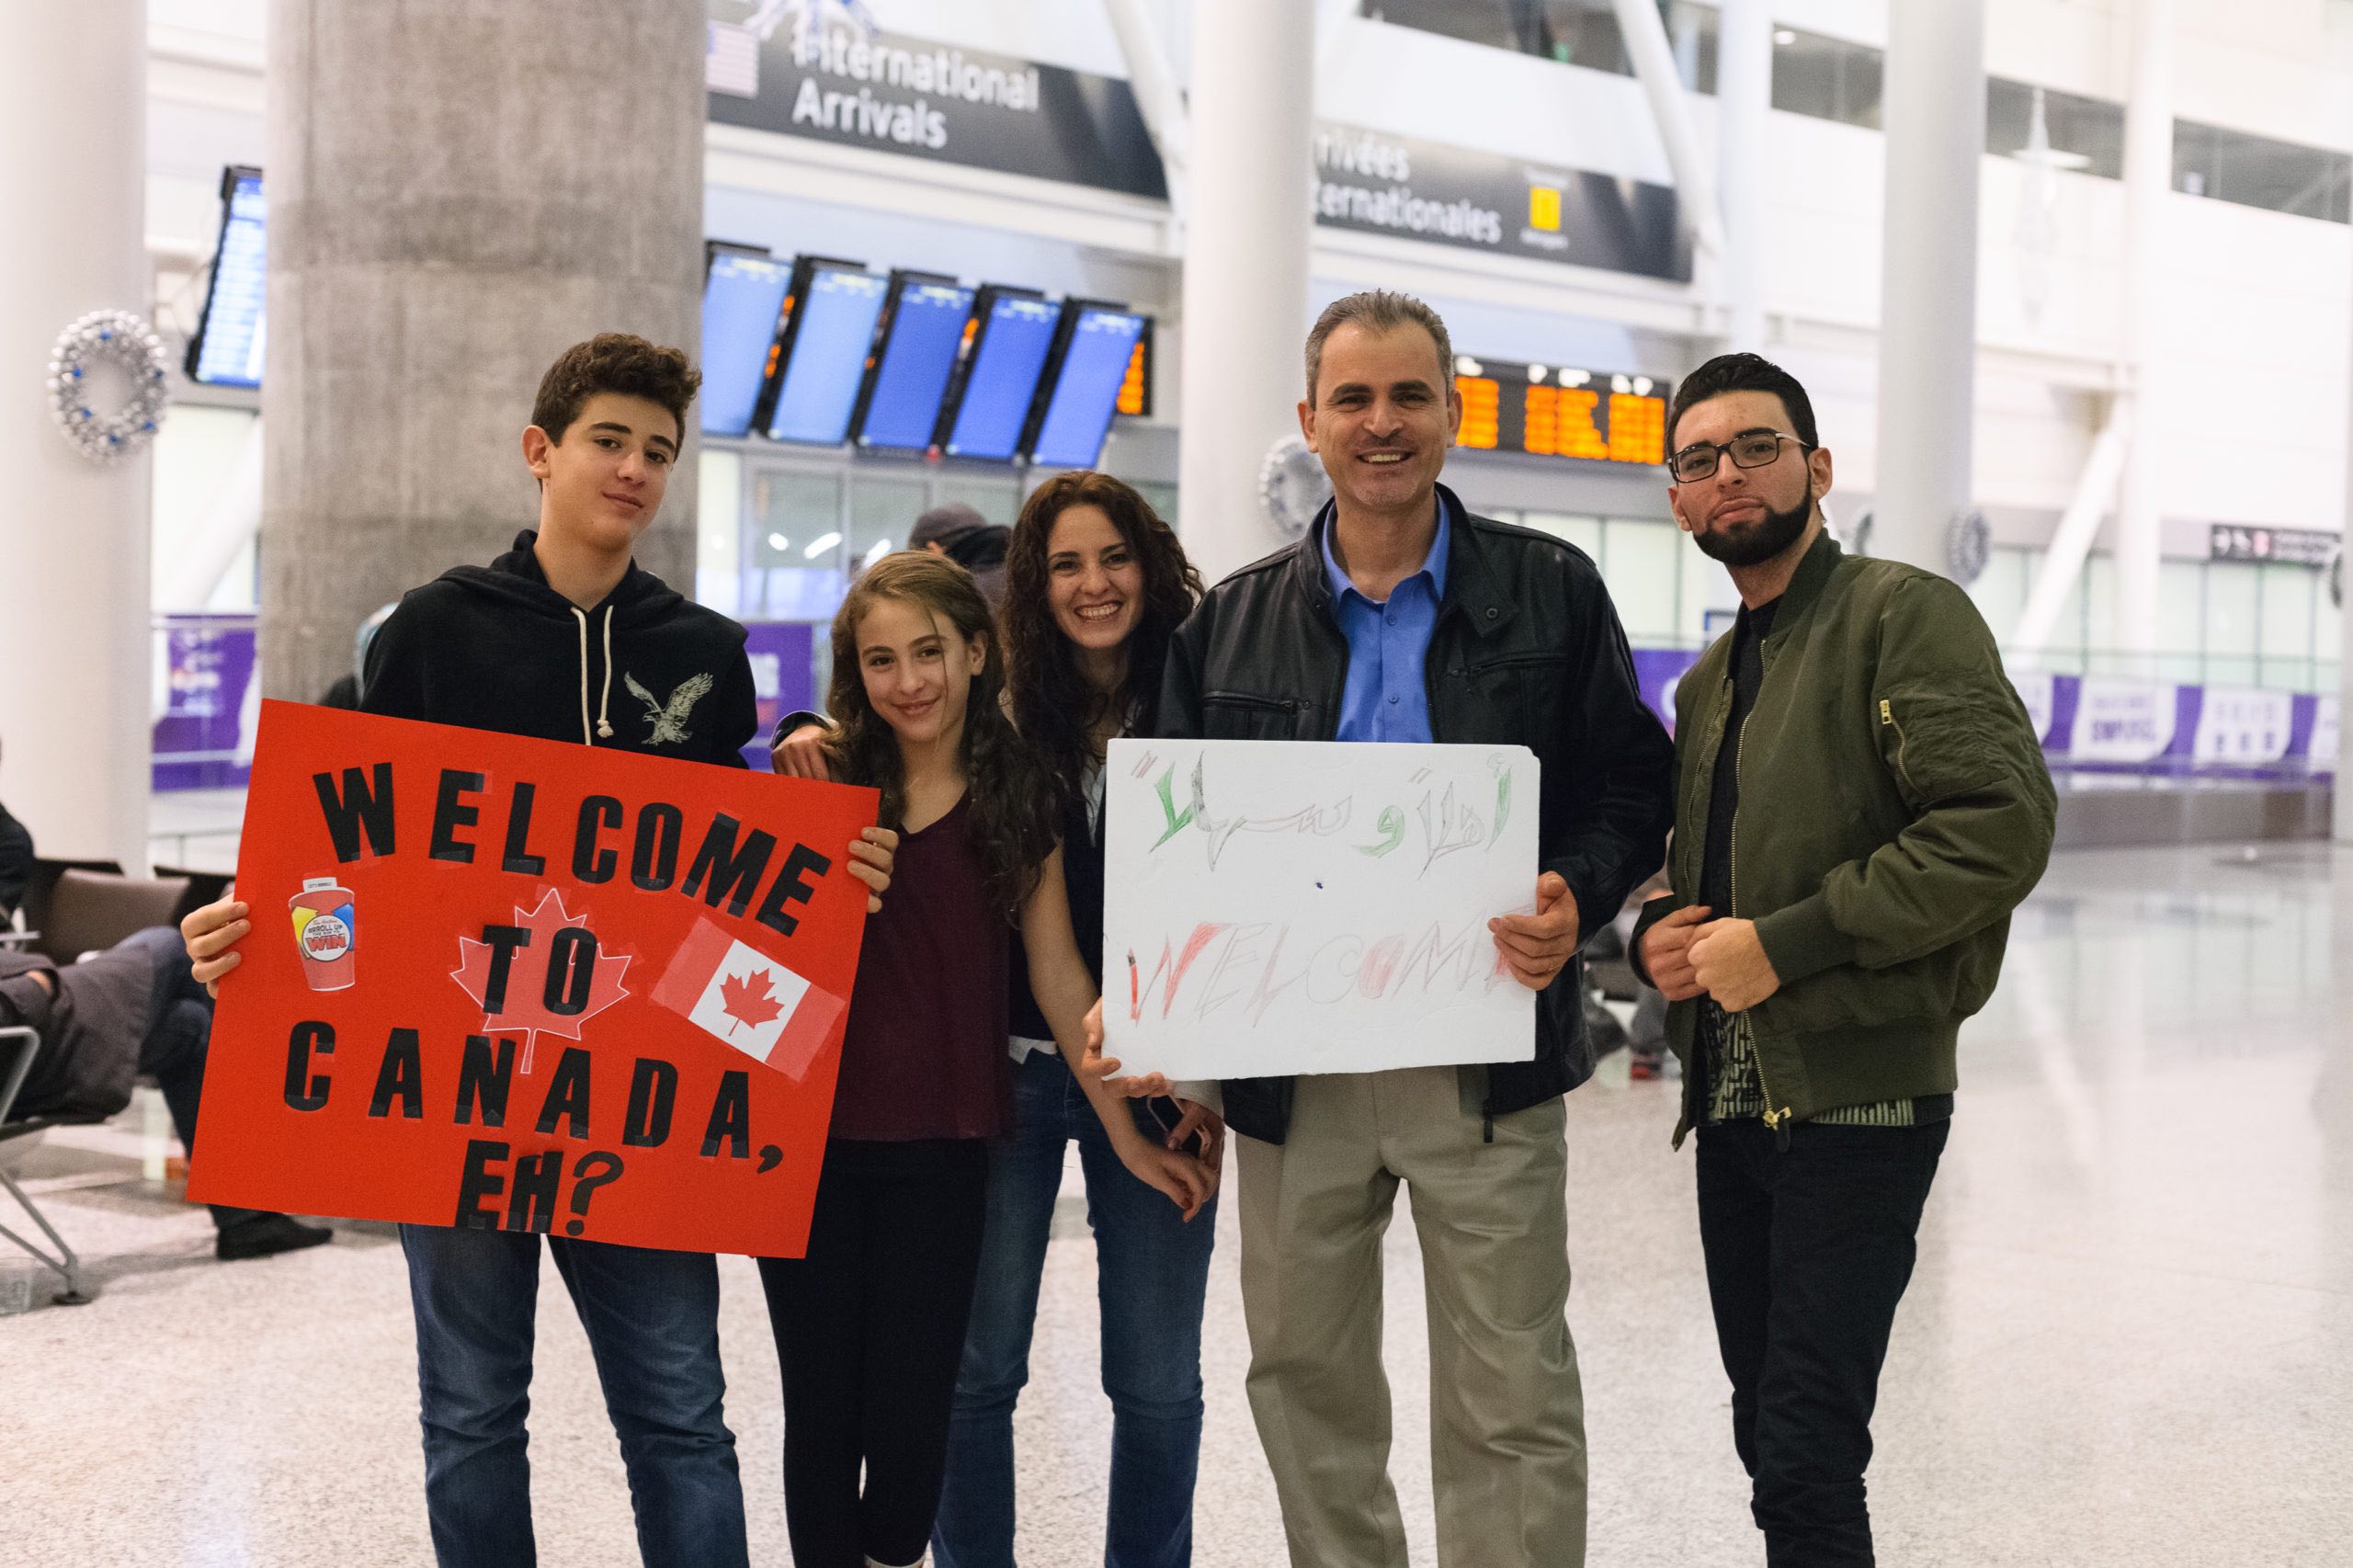 The Rafeeh family, originally from Syria, waits to welcome Syrian refugees at Toronto’s Pearson airport in 2015. Photo: Stacey Newman/Shutterstock